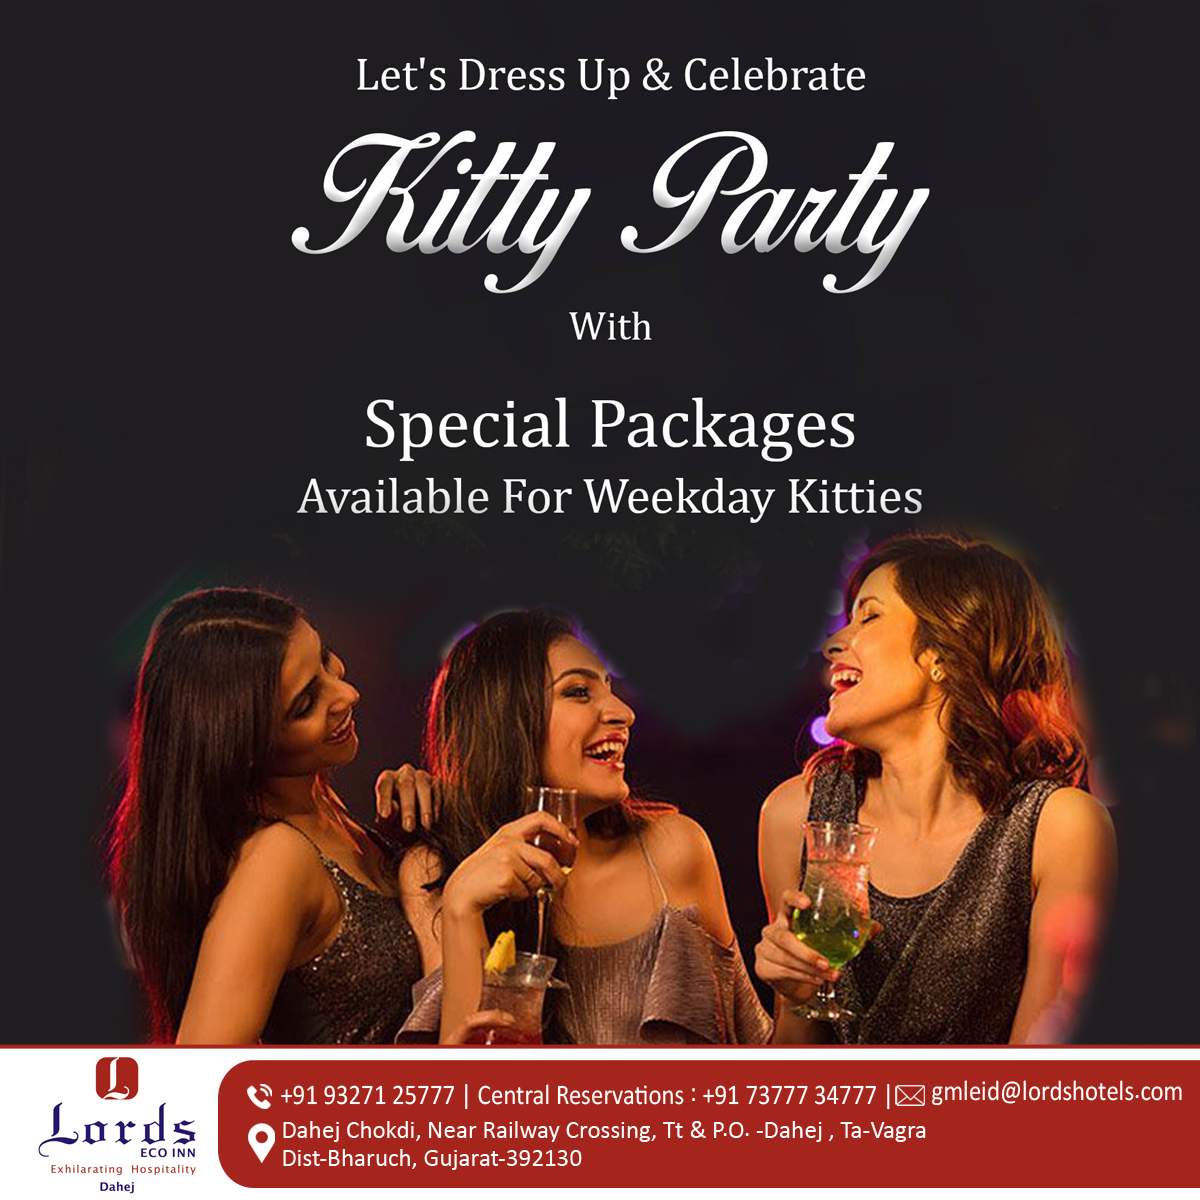 Let's Dress Up & Celebrate Kitty Party with Special Packages 😄

#kittyparty #ladiesparty #kittypartygames #KittyPartyFun #kittypartyvenue